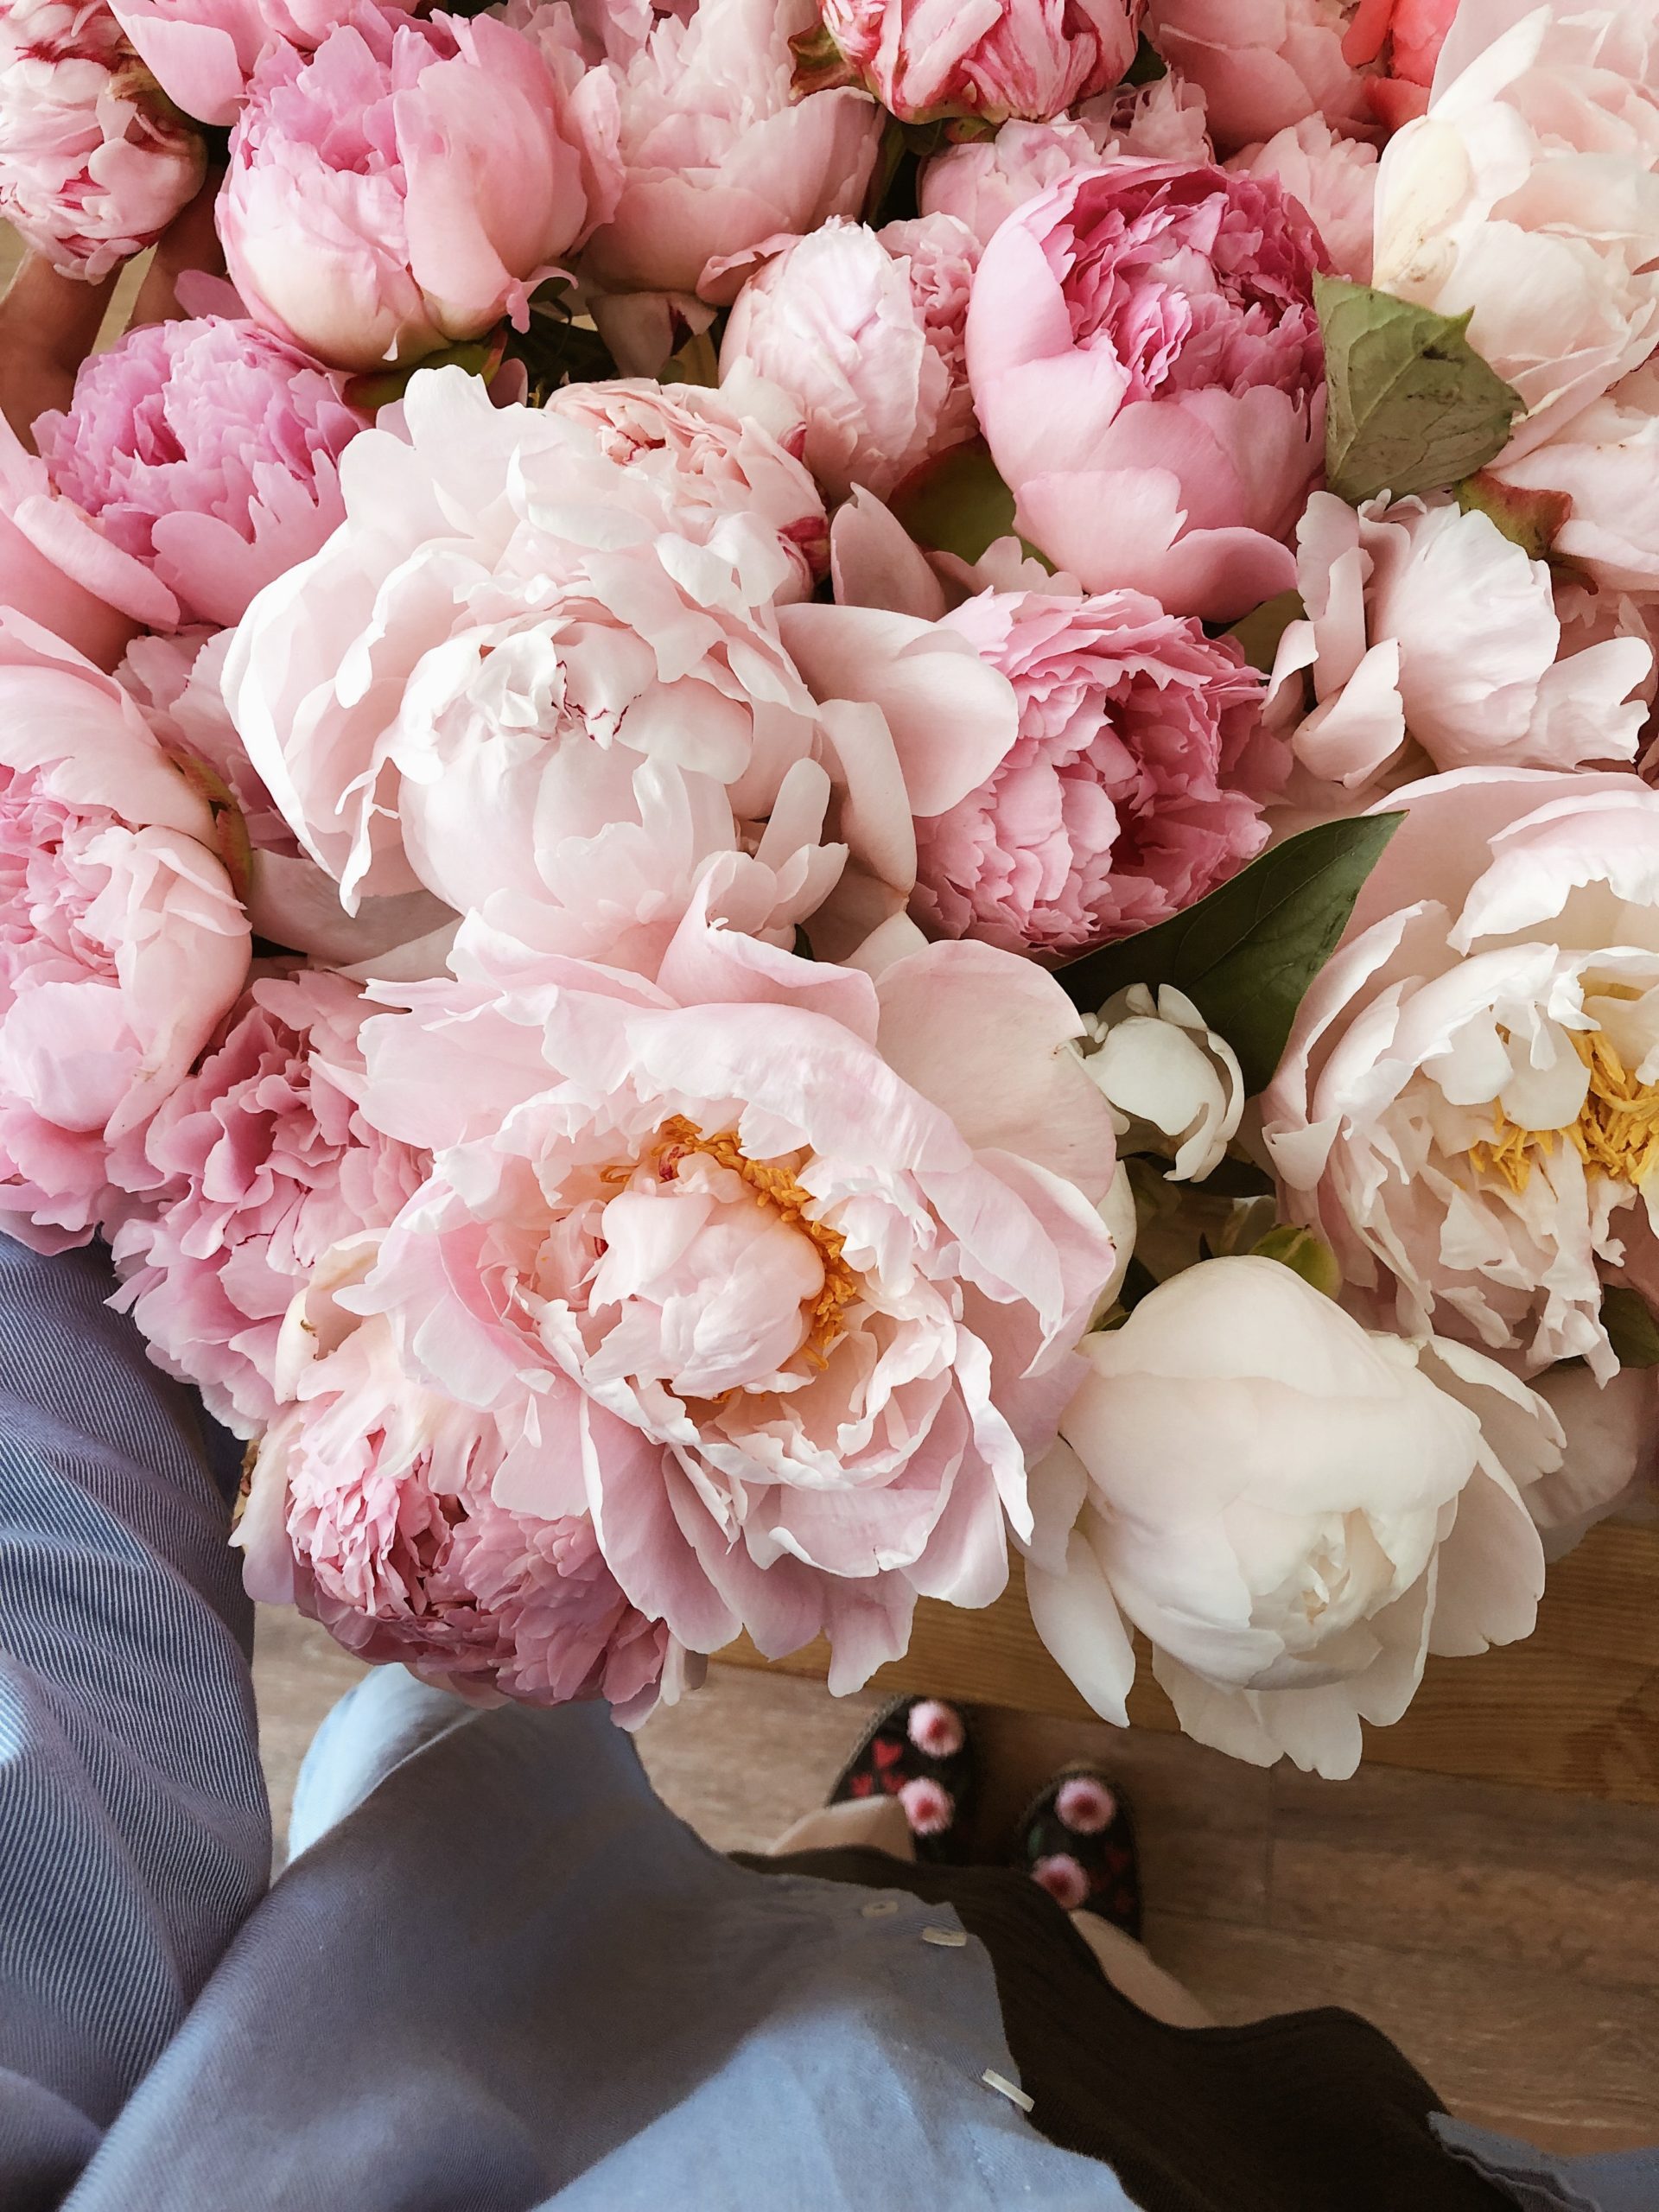 Photo by Secret Garden: https://www.pexels.com/photo/delicate-flower-bouquet-of-roses-and-peonies-2879827/